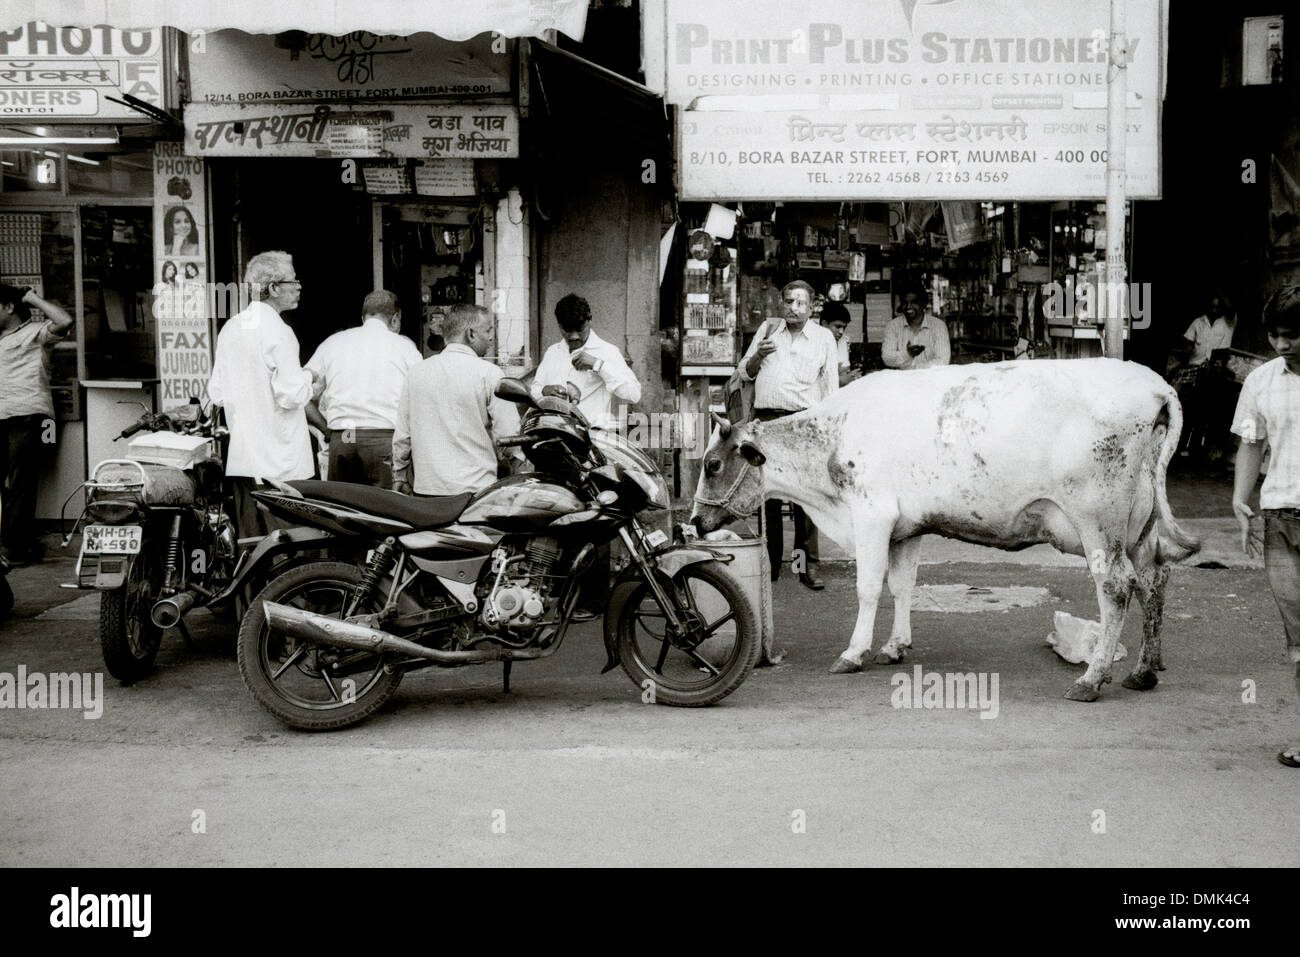 Street scene and sacred cow in Mumbai Bombay in Maharashtra in India in South Asia. Real People Daily Life Lifestyle Culture Travel Escapism Stock Photo